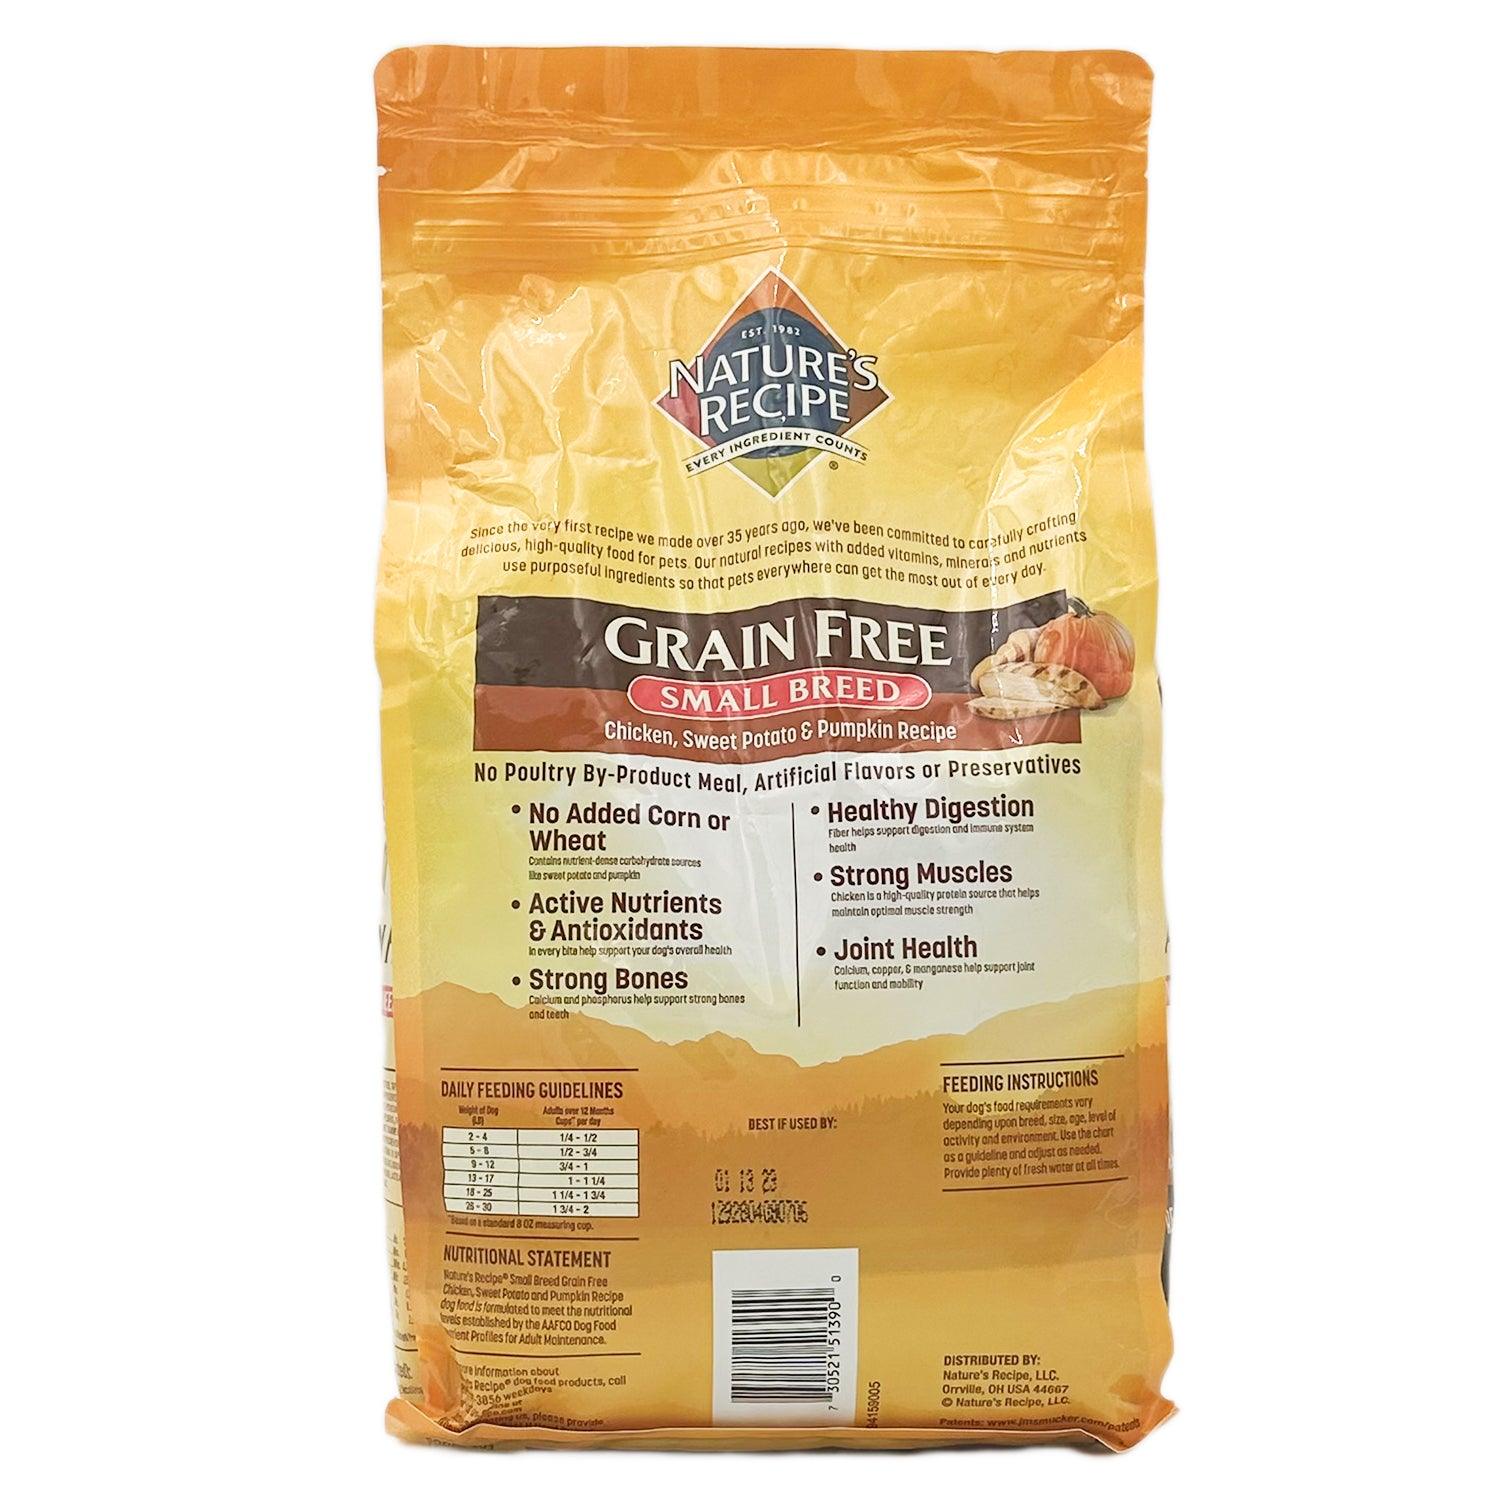 nature's recipe | adult sm dog food, grain free, chicken | 4lbs | BEST BY 01/23 - Home Revival Shop